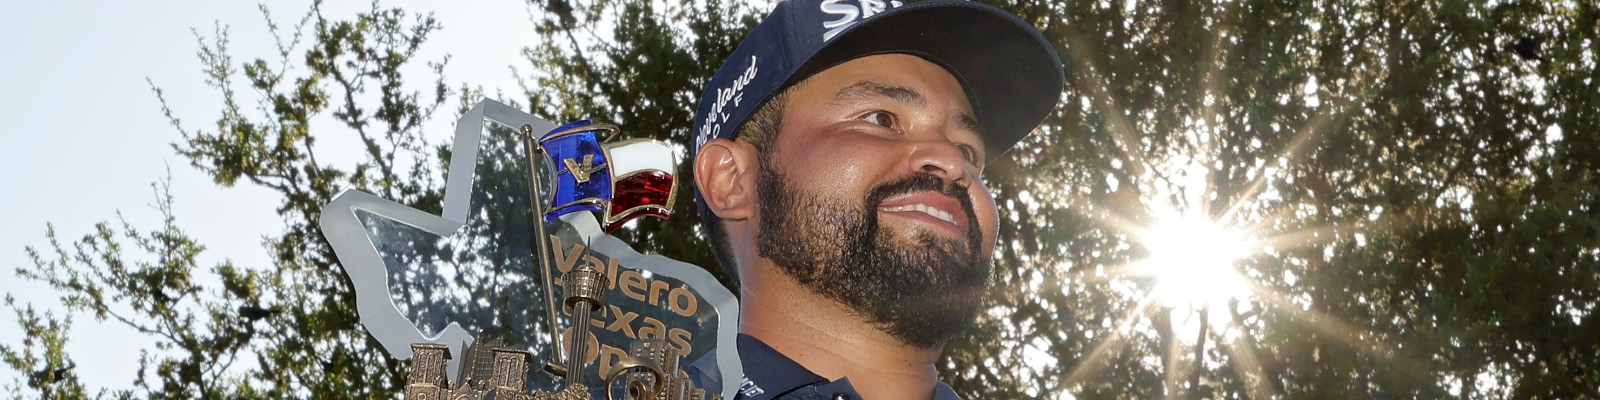 J.J. Spaun (Photo by Stacy Revere/Getty Images)